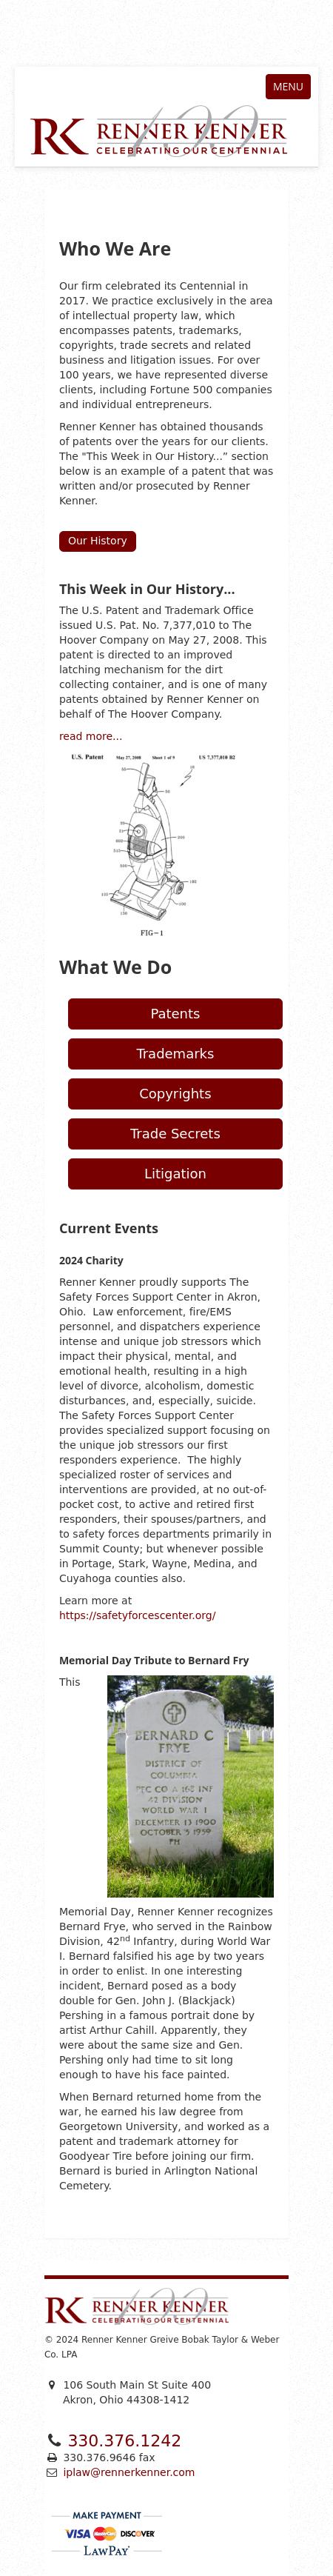 Renner & Kenner LPA - Akron OH Lawyers